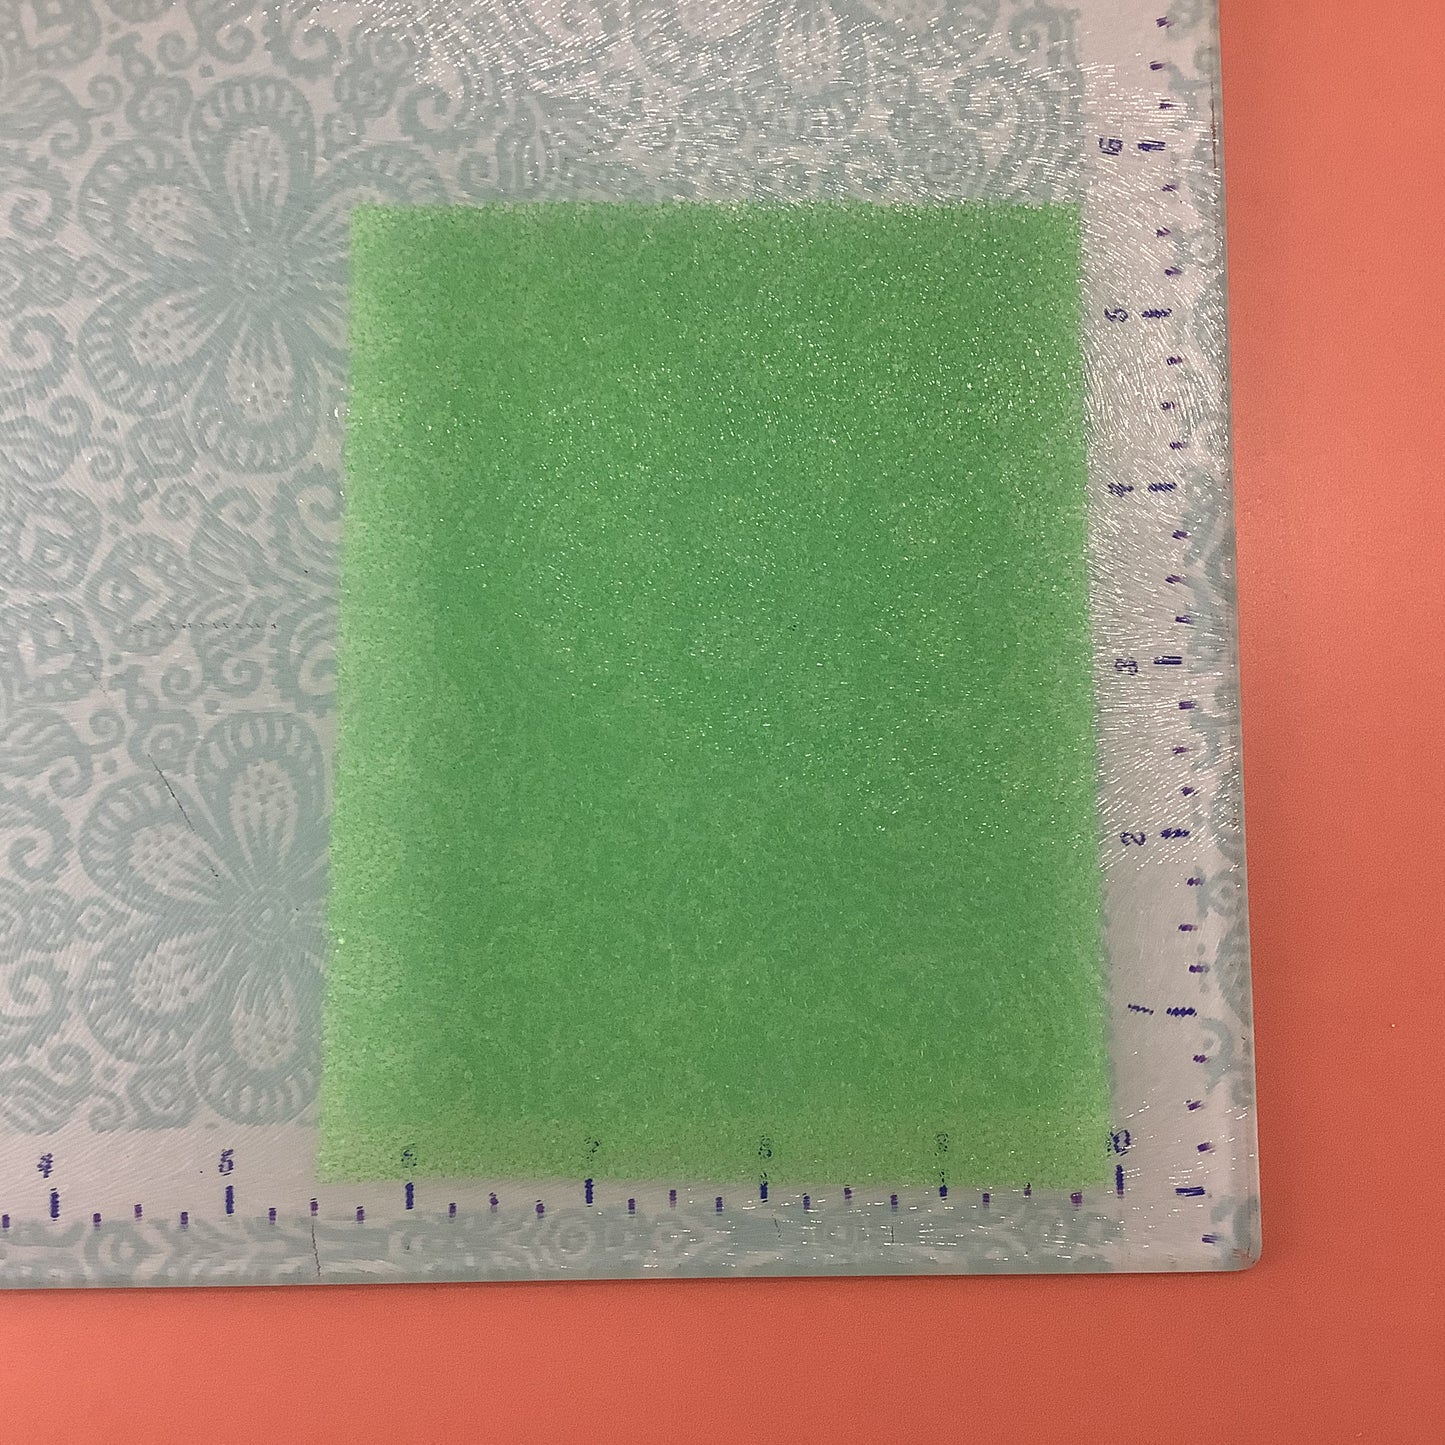 Green Sponge for polymer clay texture techniques